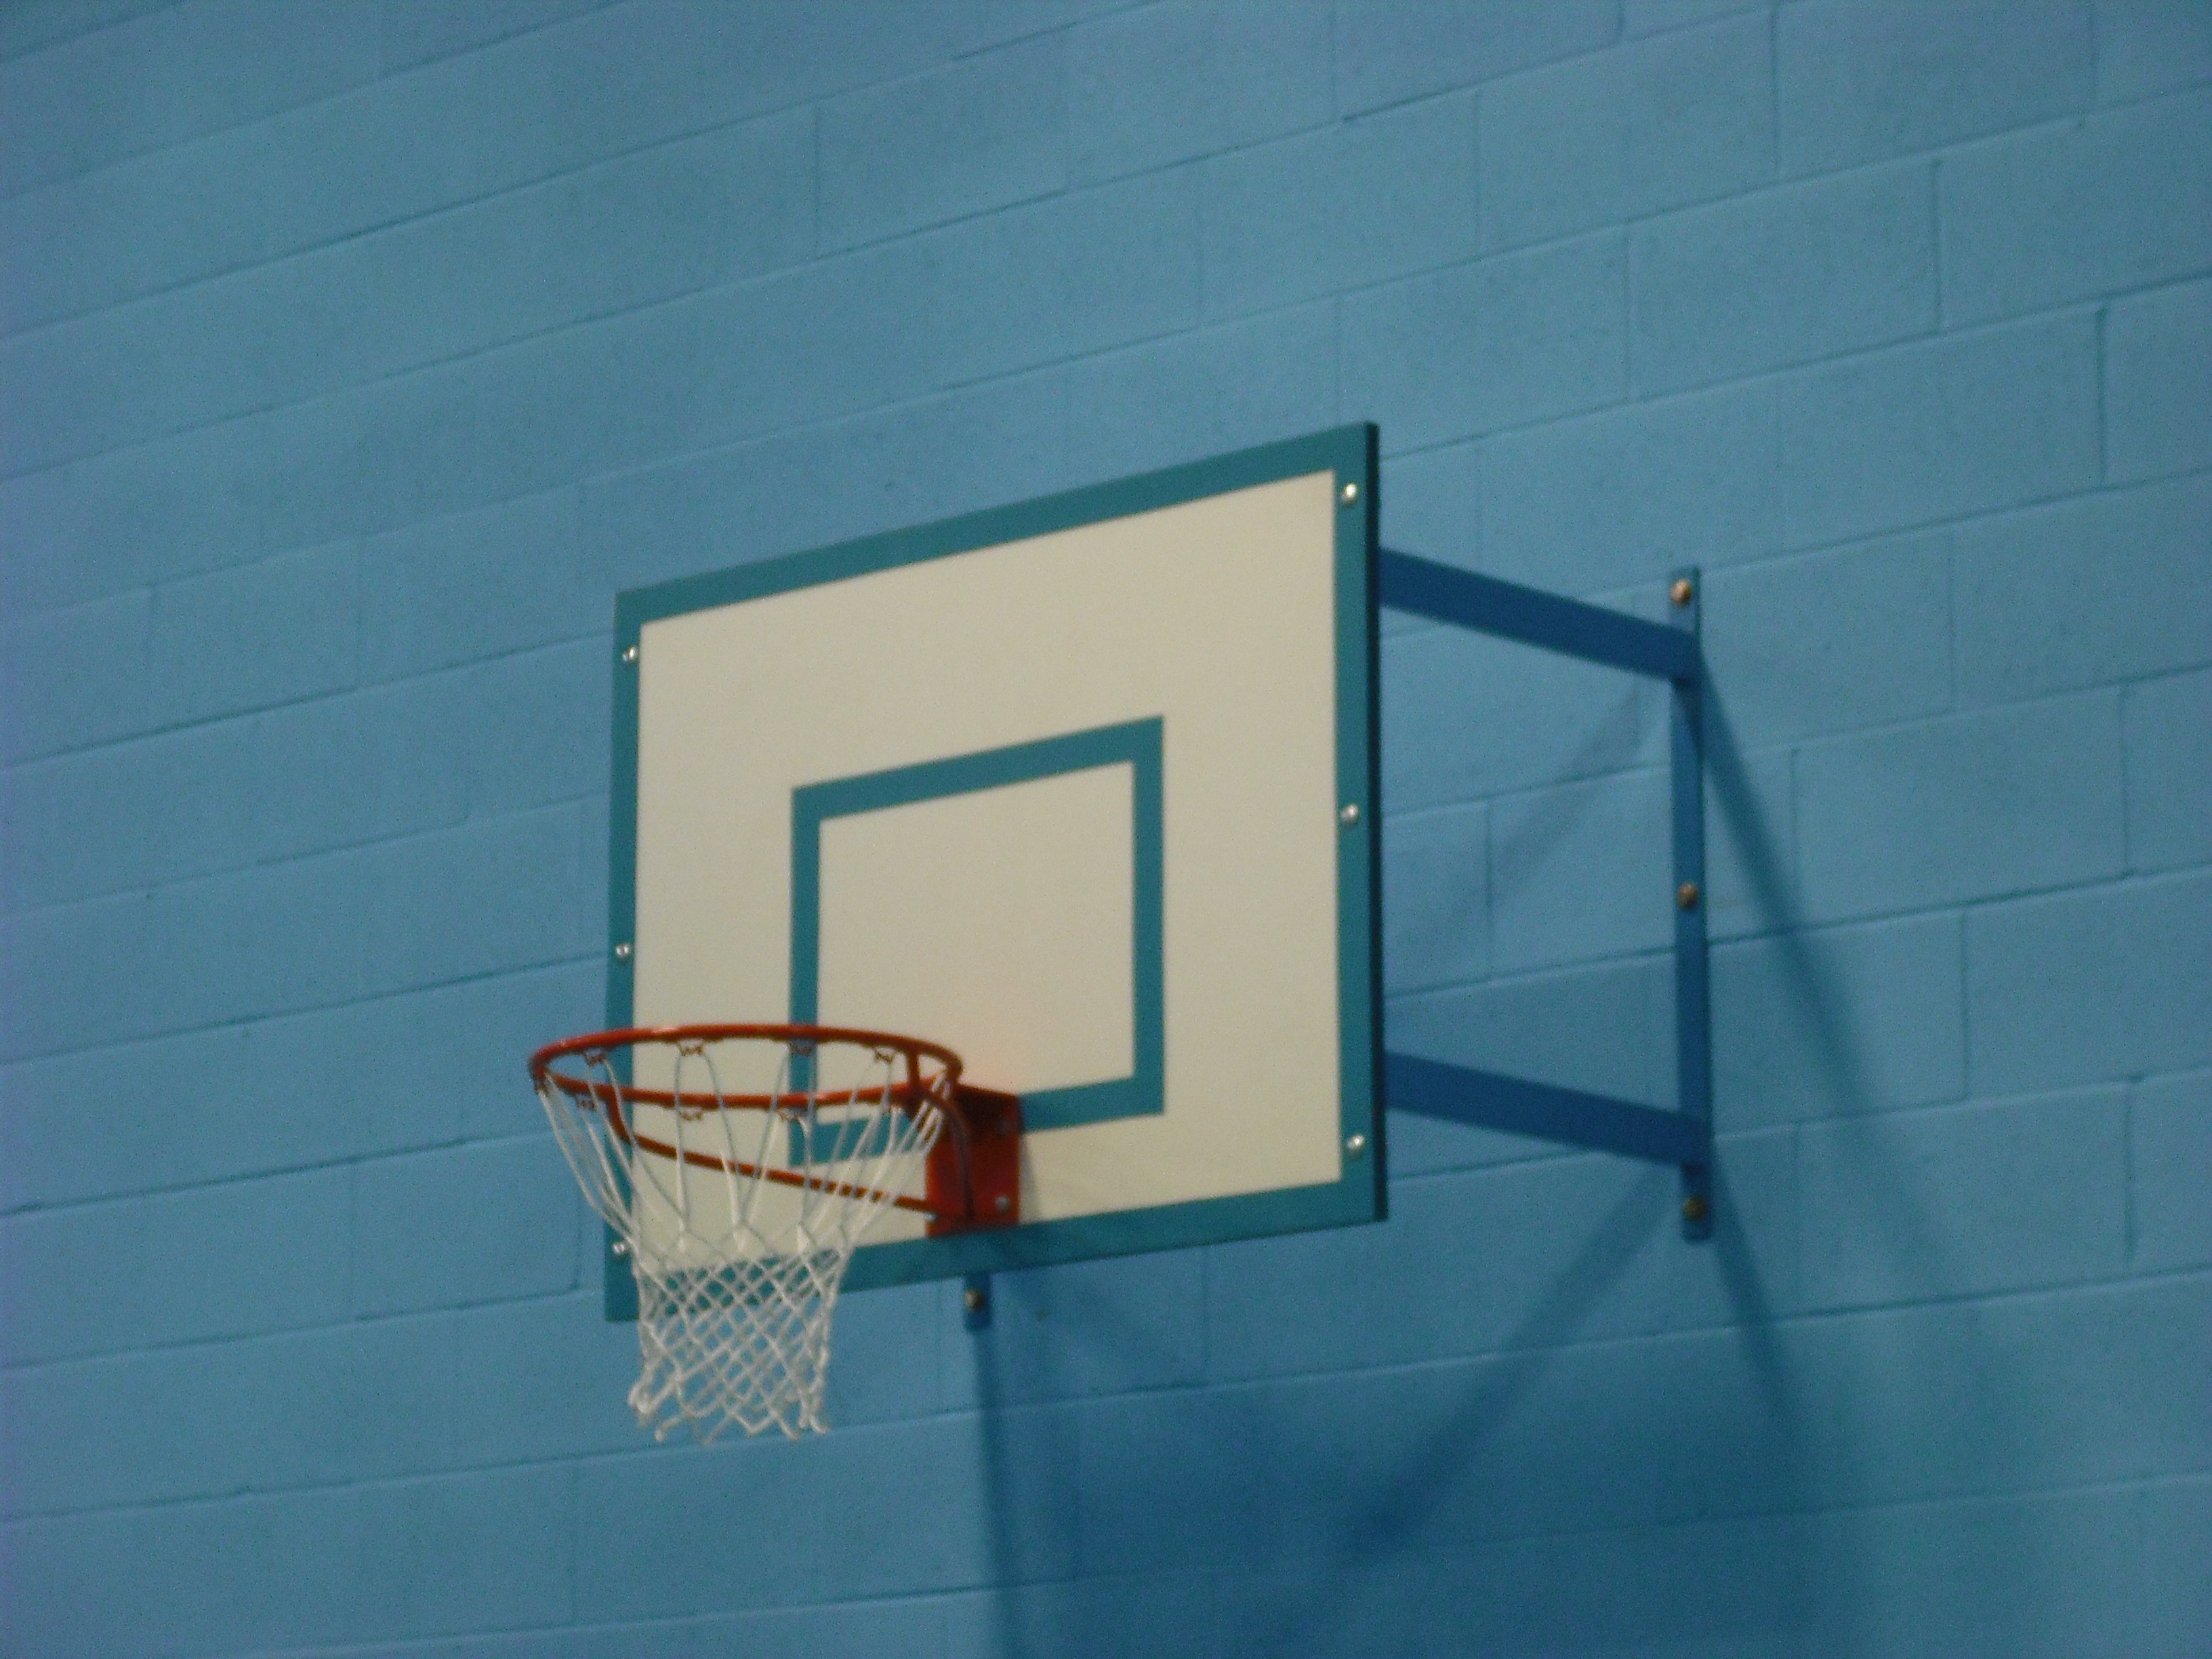 Fixed projection practice basketball goal